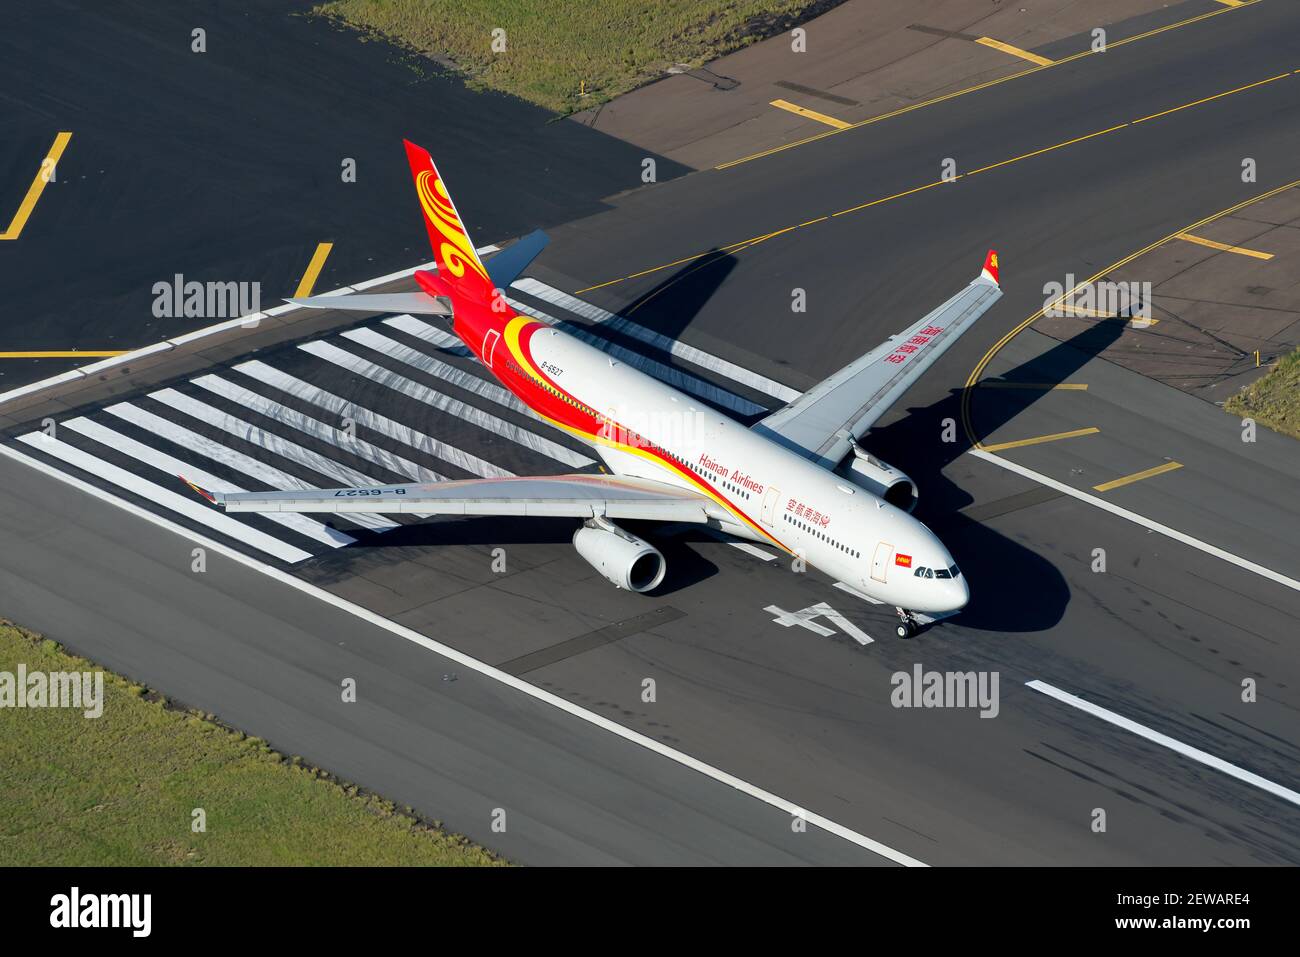 Hainan Airlines Airbus A330 aircraft seen from above at international airport runway. Aerial view of Airbus A330-300 airplane B-6527 of Hainan Airline. Stock Photo